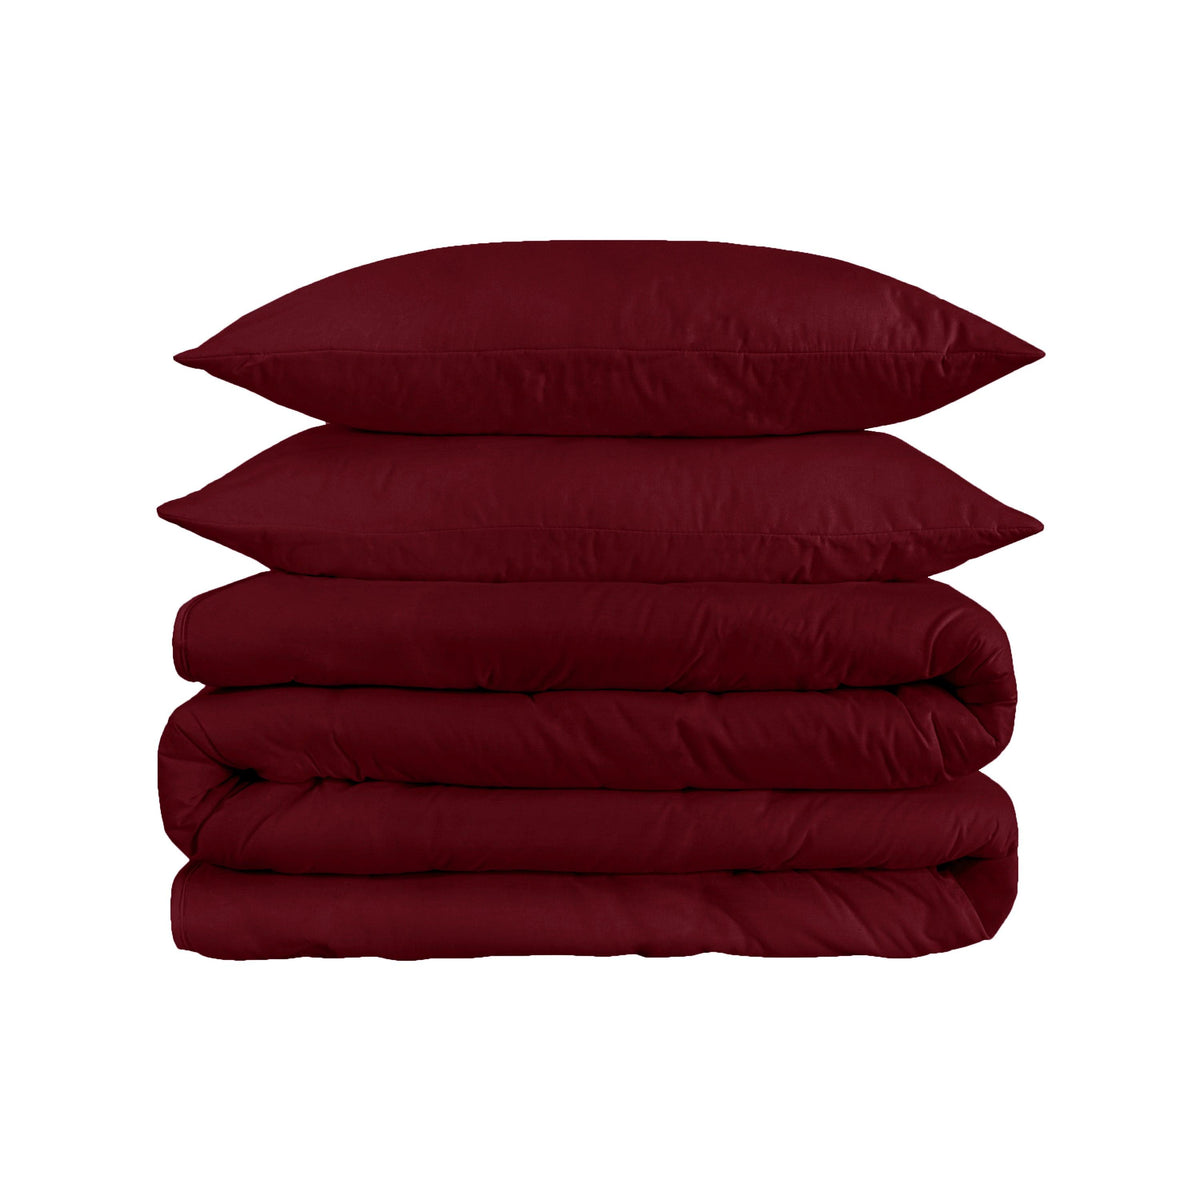 1200 Thread Count Egyptian Solid Cotton Duvet Cover Set - Duvet Cover Set by Superior - Superior 